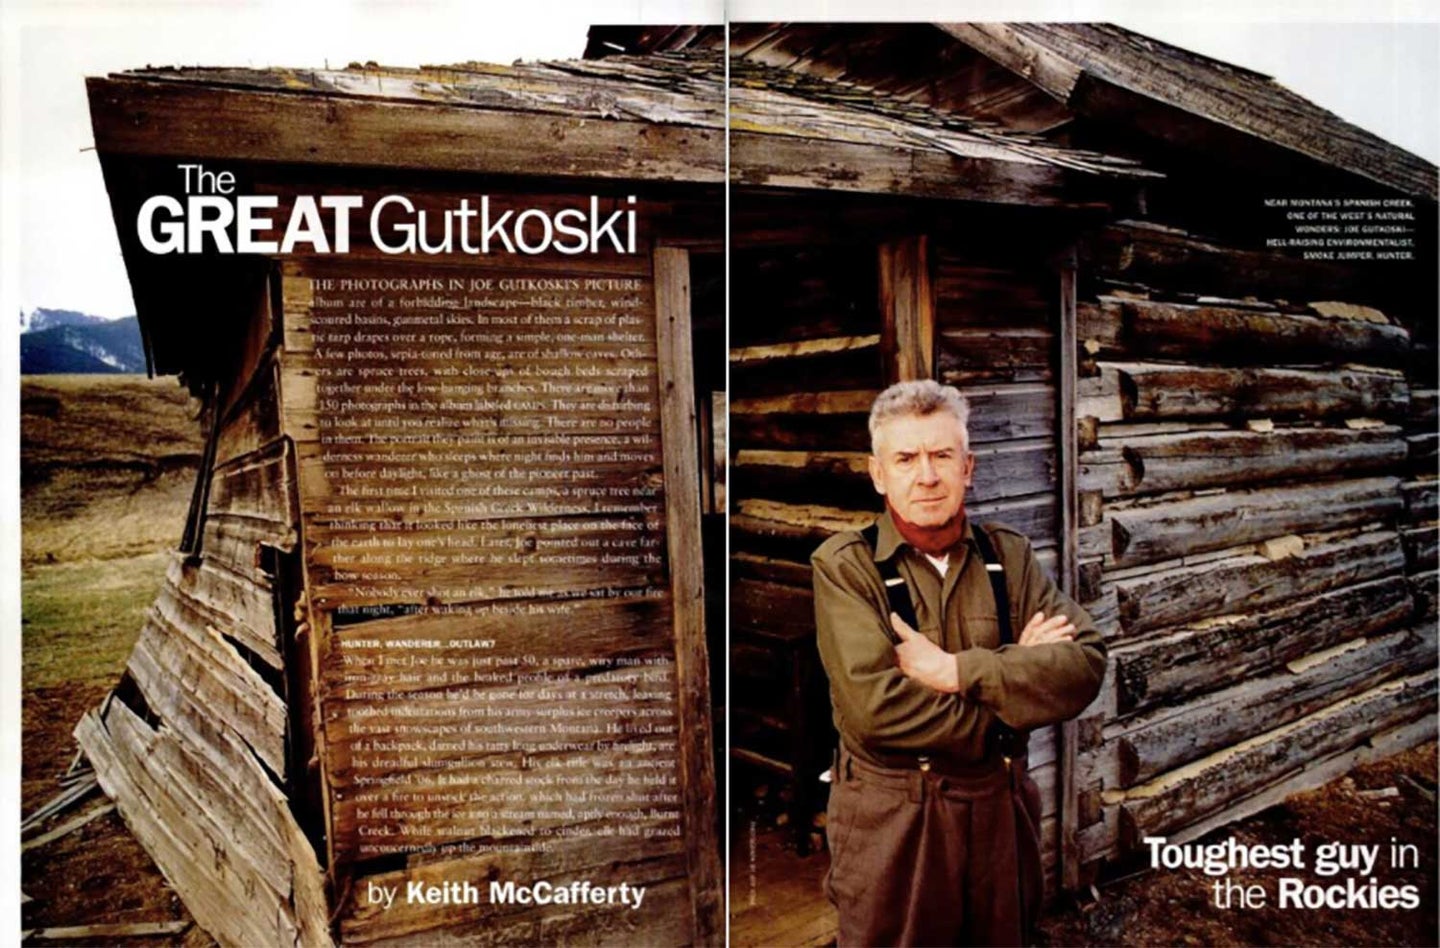 A clipping from Field & Stream Magazine showing a man standing in front of a wooden cabin.